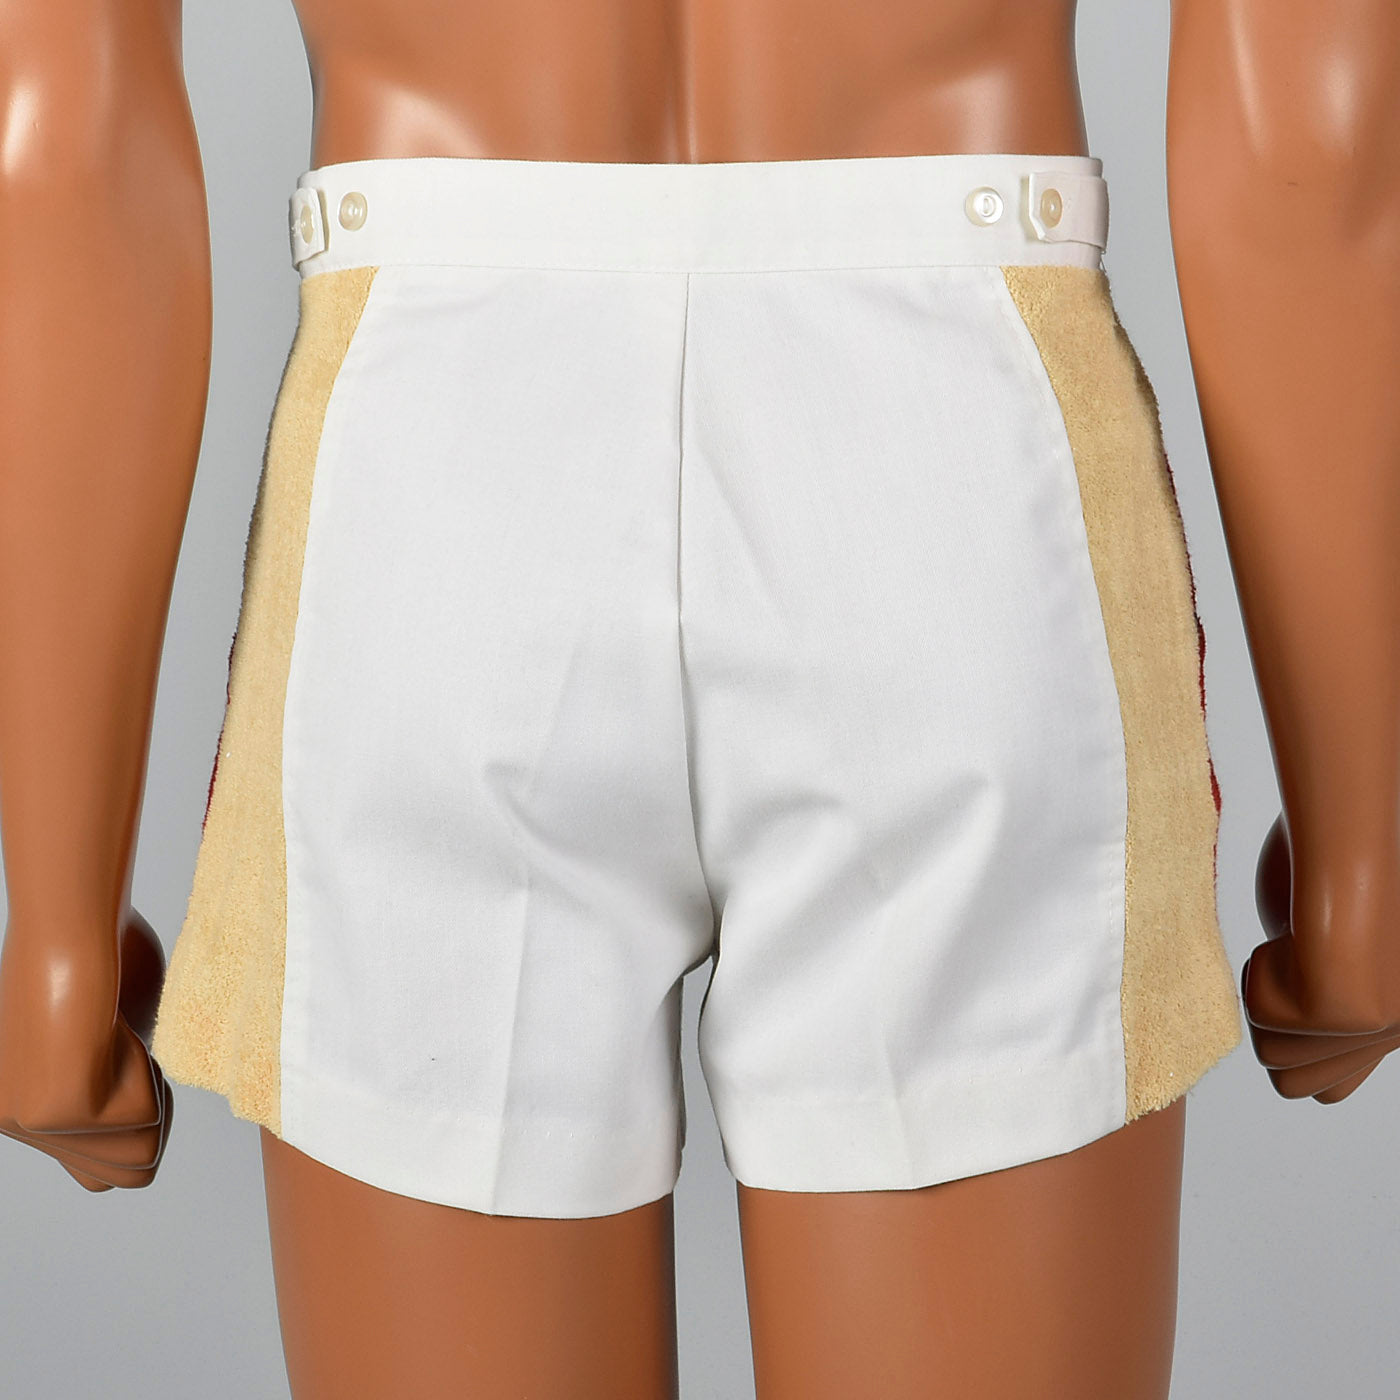 1970s Mens Jockey Shorts with Terry Cloth Panels – Style & Salvage